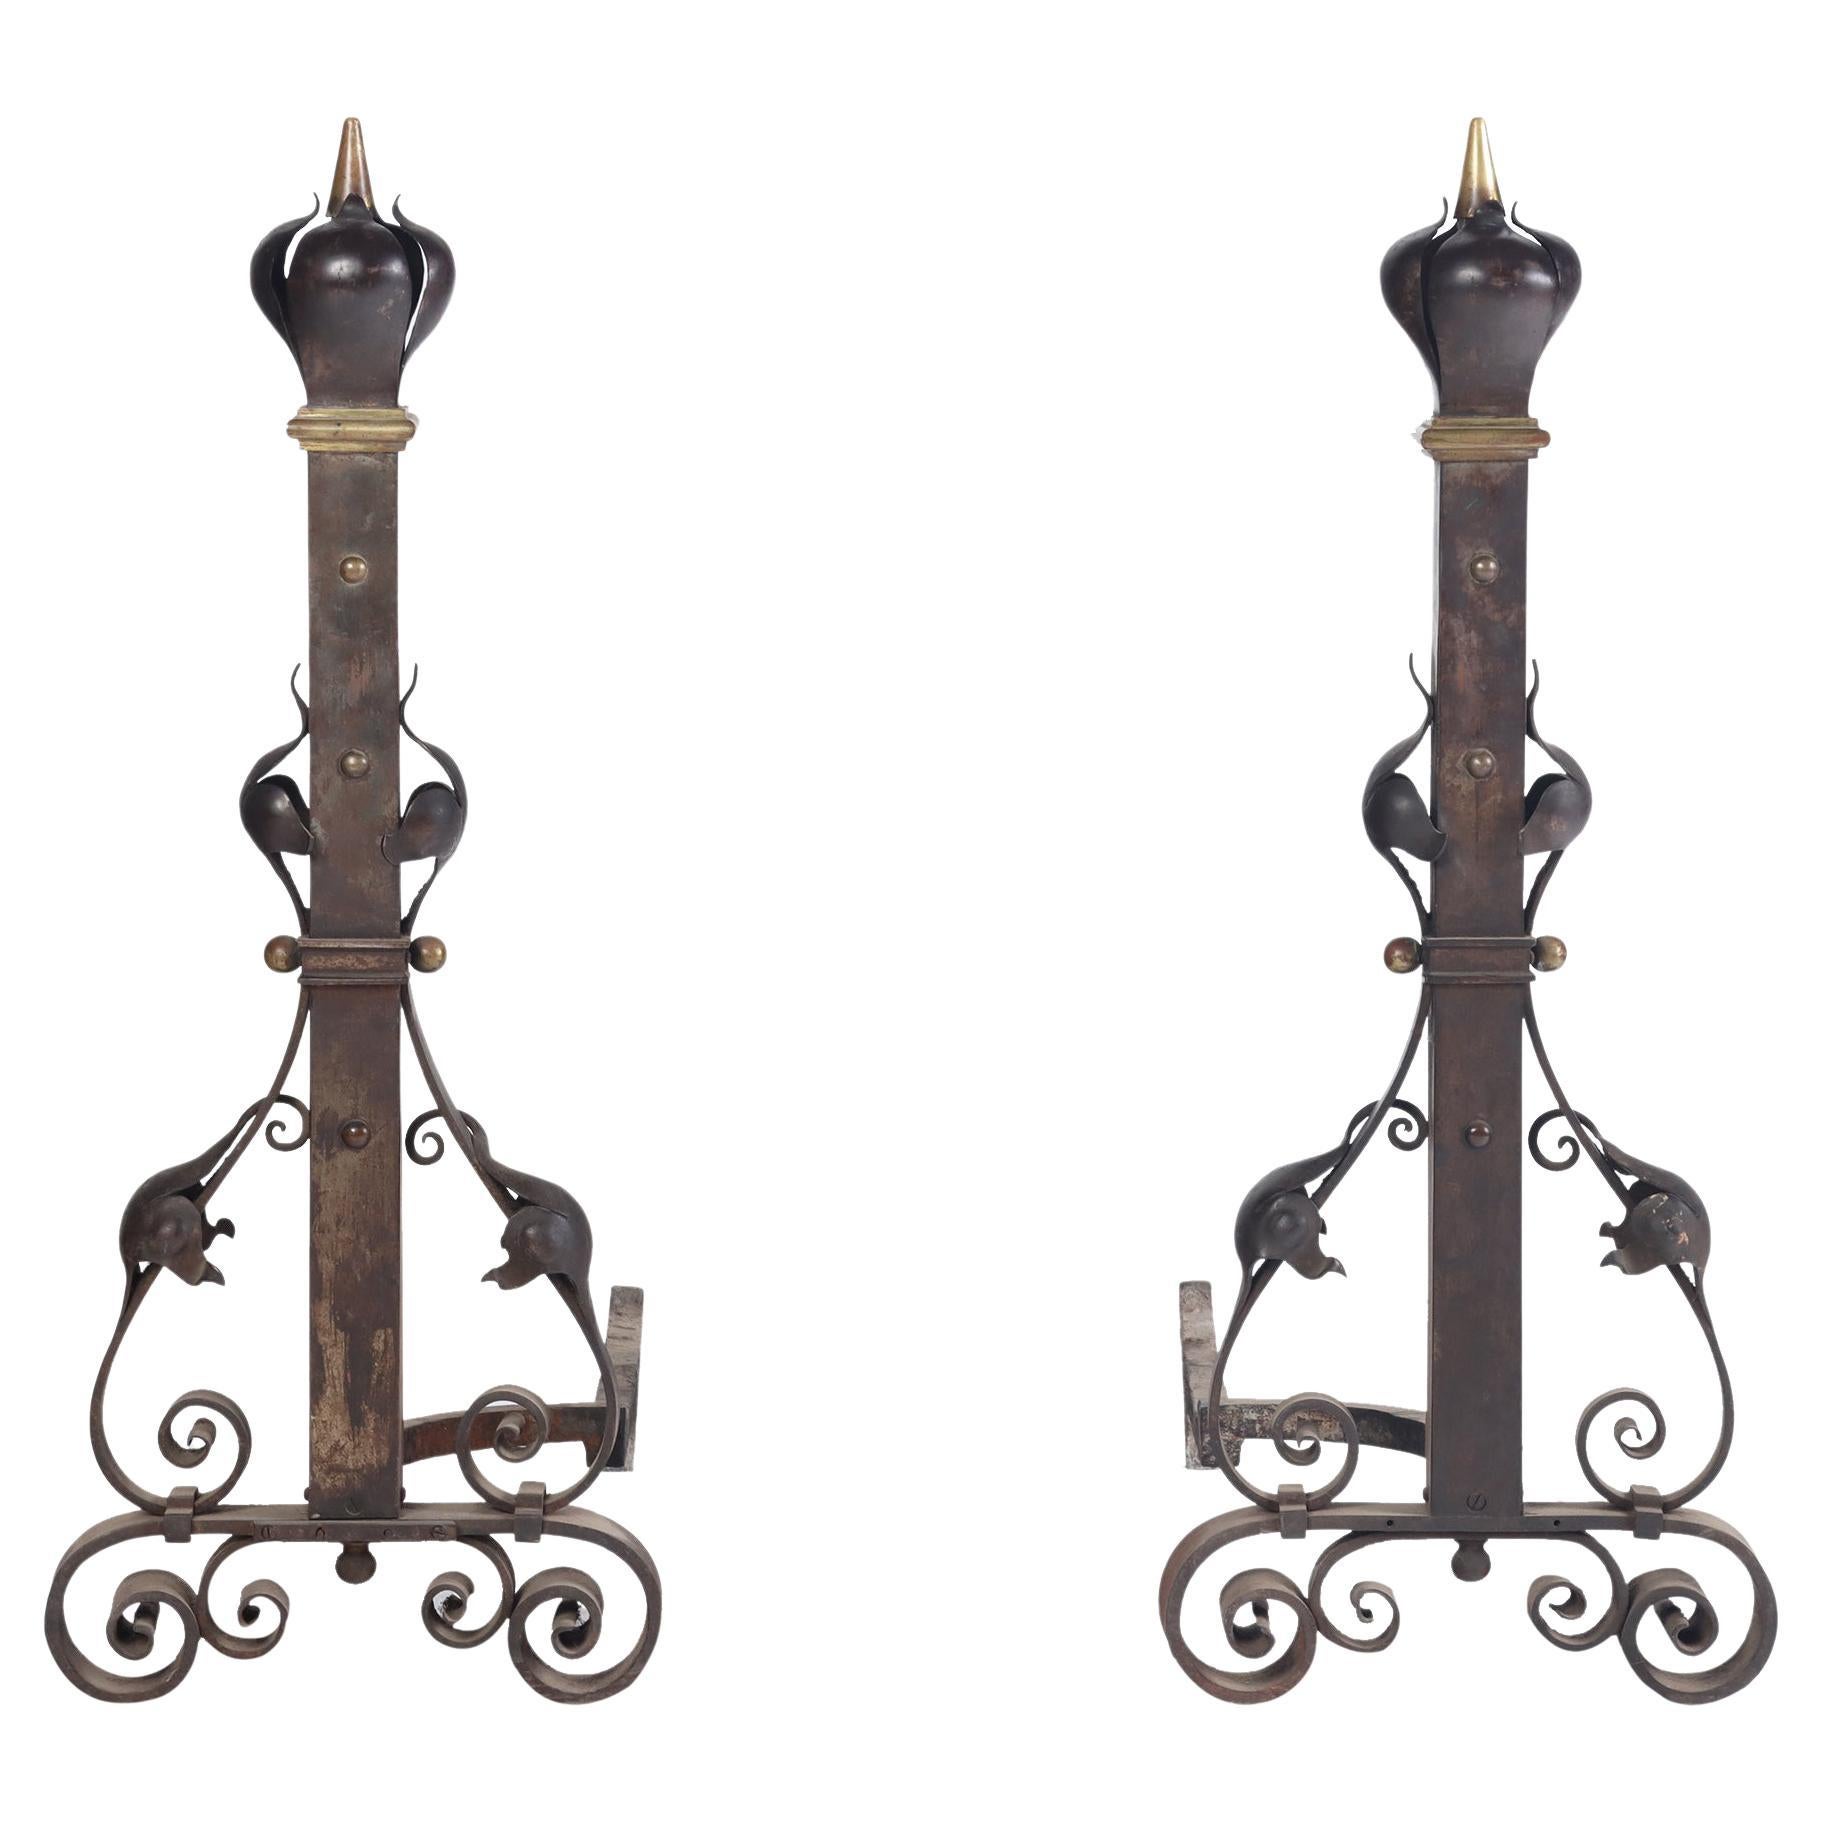 Substantial and Monumental Pair of Nineteenth Century French Wrought Iron and For Sale